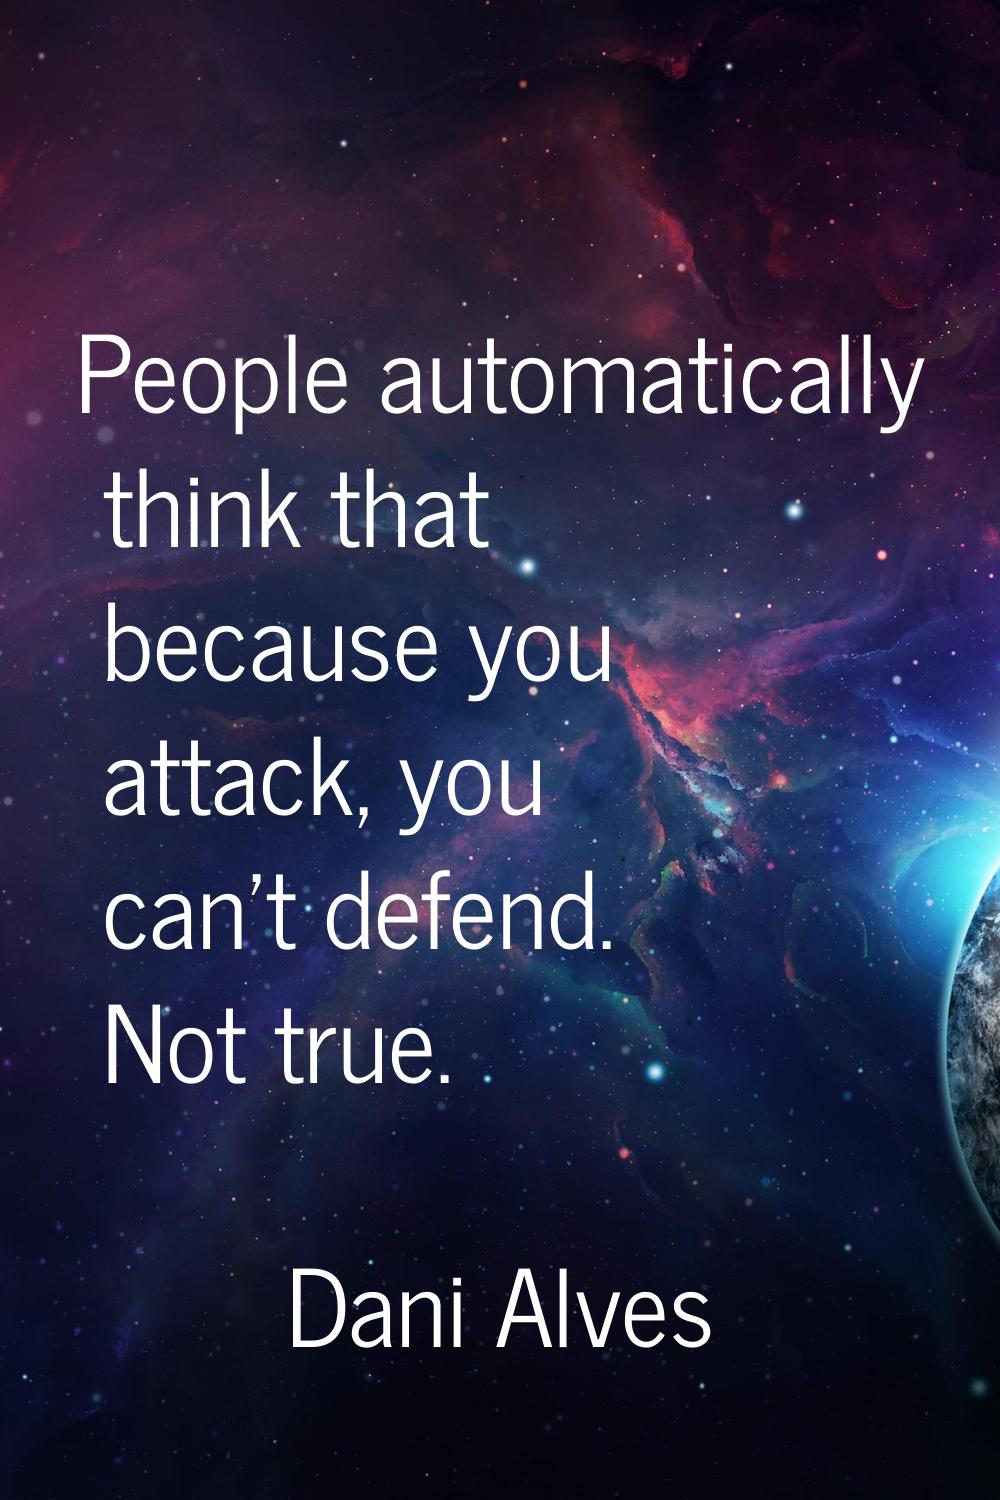 People automatically think that because you attack, you can't defend. Not true.